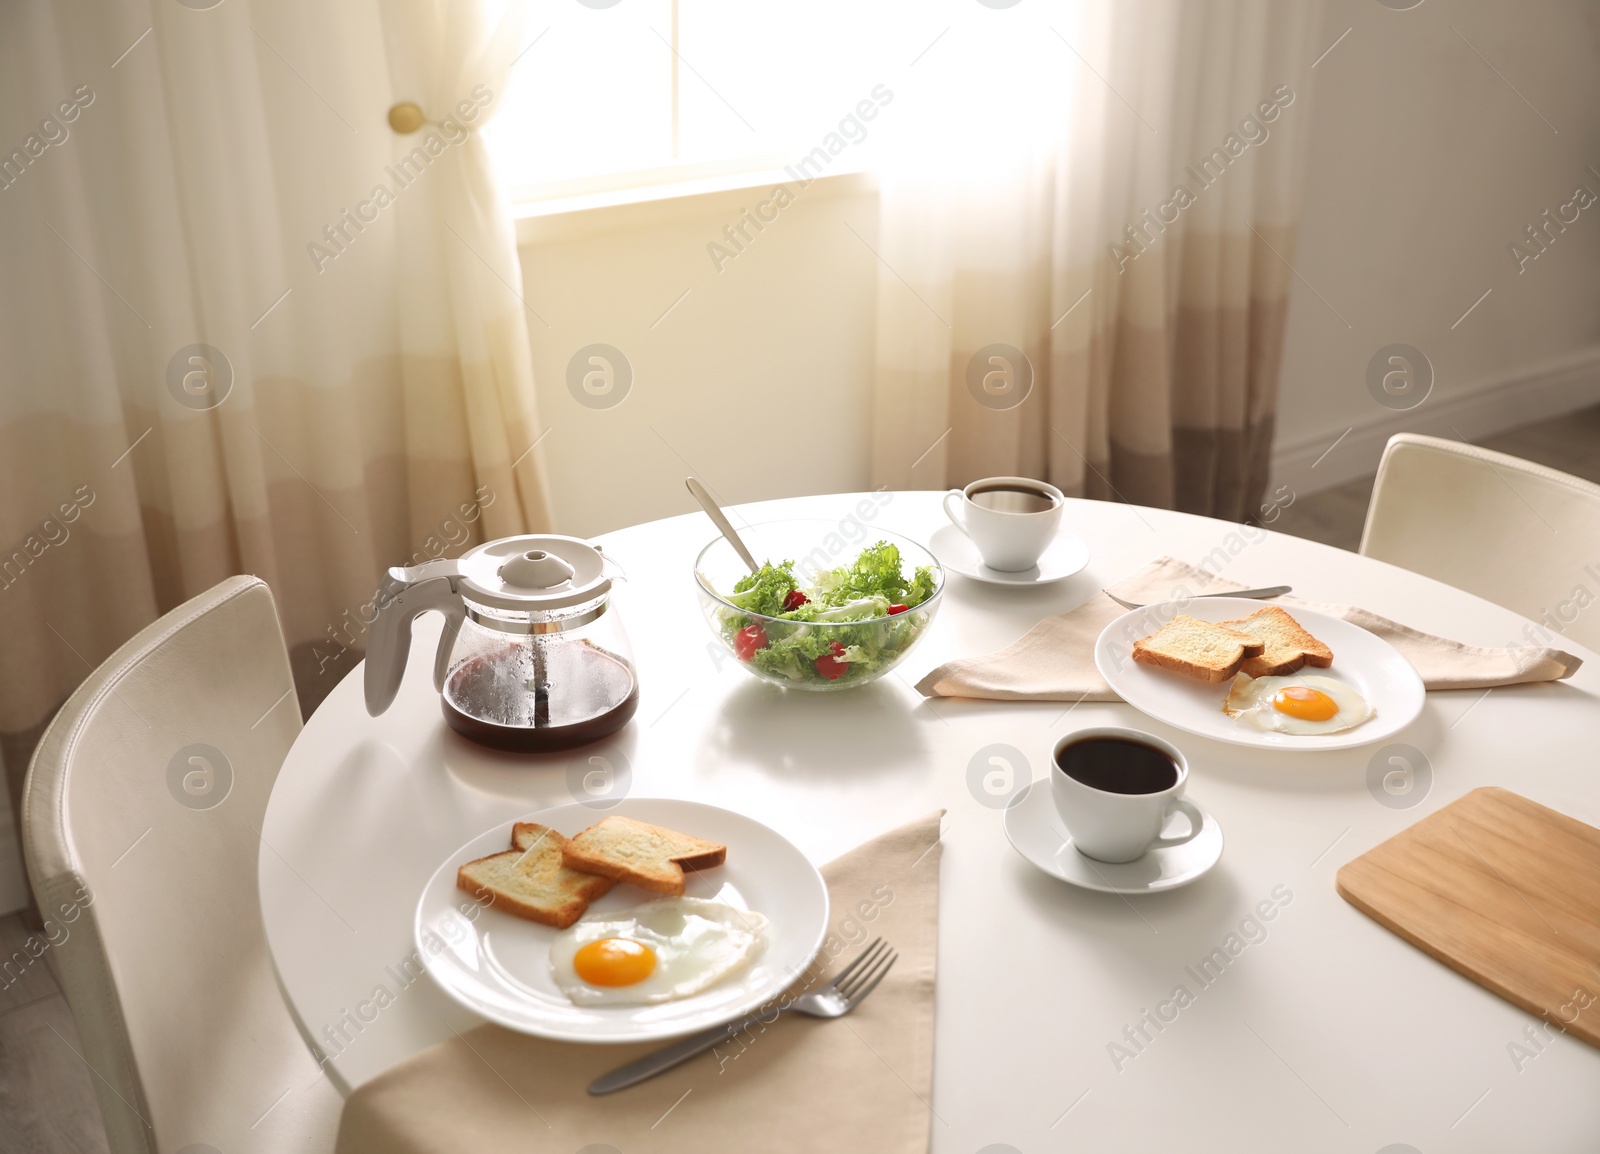 Photo of Tasty breakfast served on table in light room